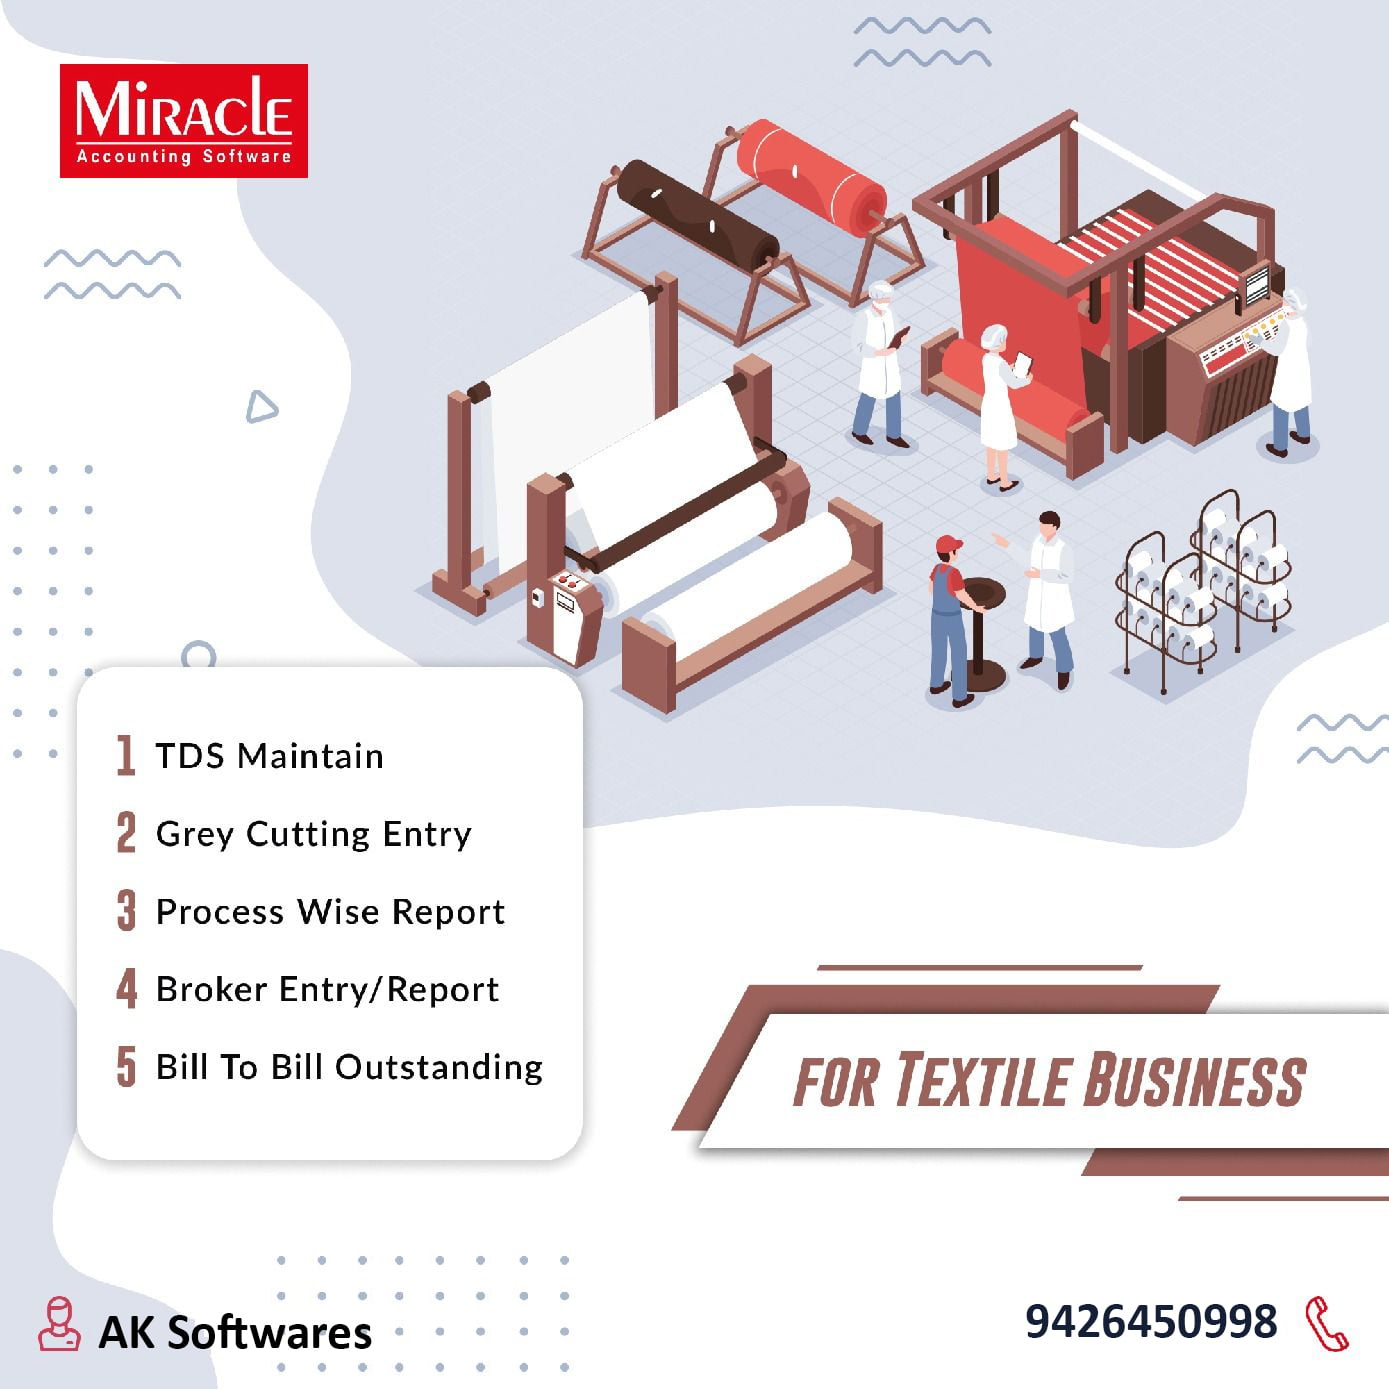 miracle-software-for-textile-business